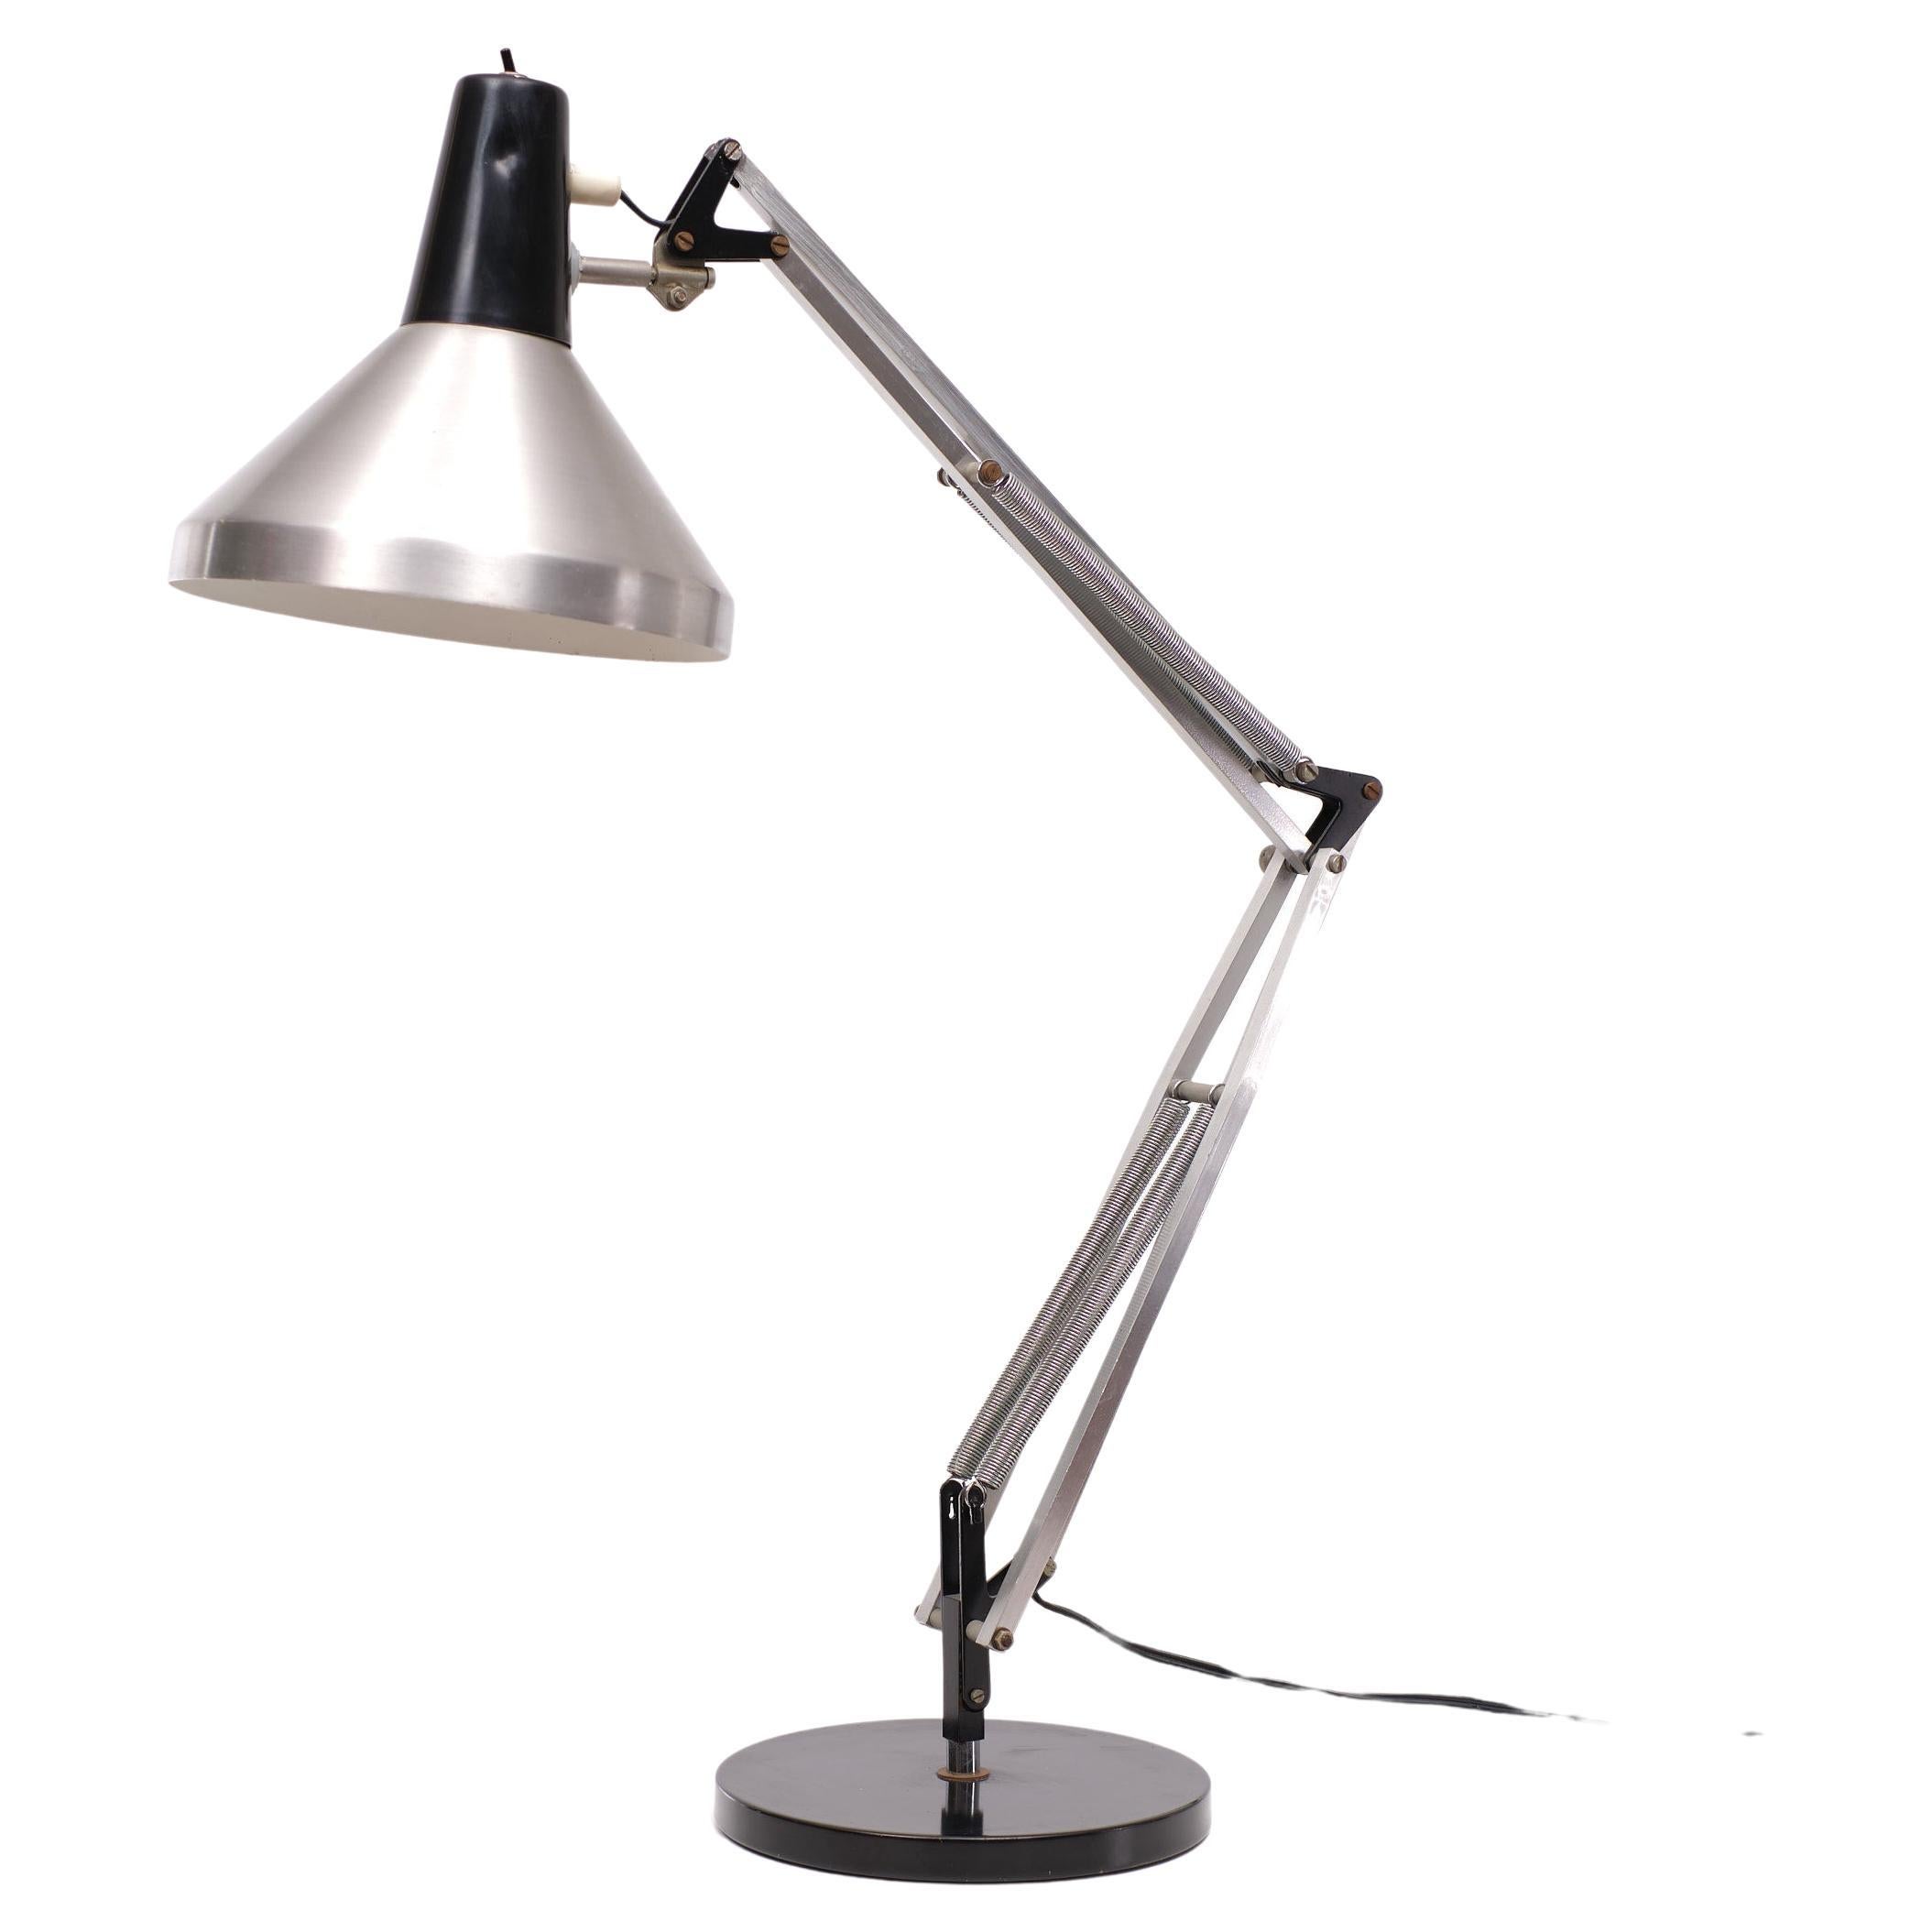 Dutch Design this Hala Zeist Architect en table or desk lamp. Model T9 
1960s Very nice example. Works perfect. Light in every direction you want.
One large E27 bulb needed.